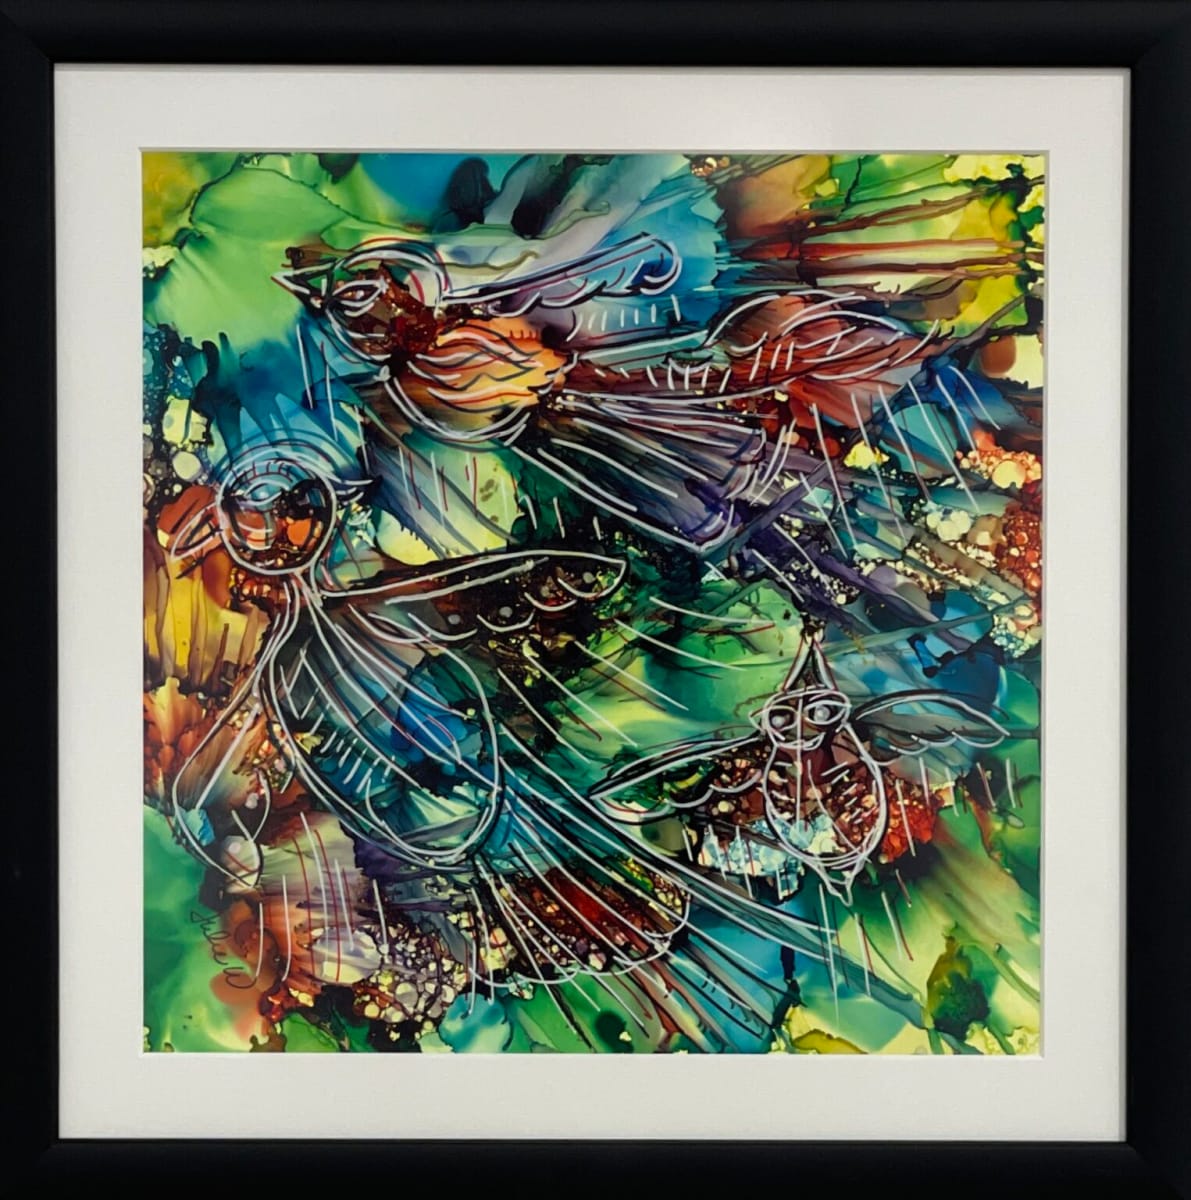 “Flying Towards Peace” - Framed by Jon Osborne  Image: This work of art is a collaboration of Julie Wilmot and Jon Osborne.